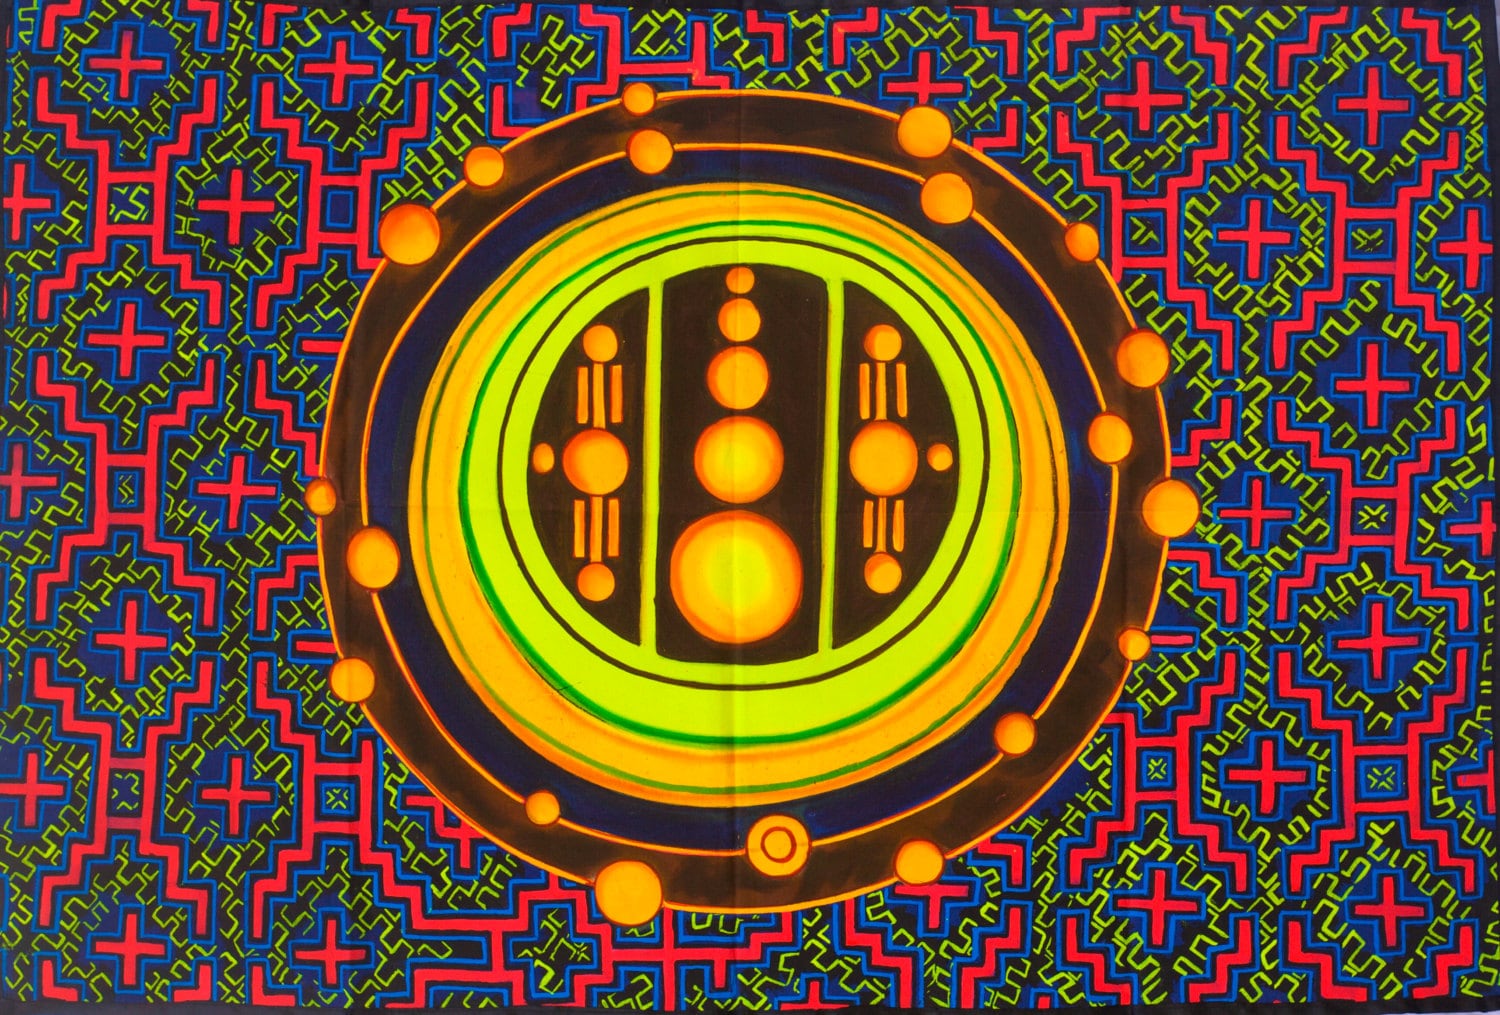 Ayahuasca Crop Circle UV Painting - 90x60cm - handmade on order - fully blacklight glowing colors - psychedelic dmt visionary artwork